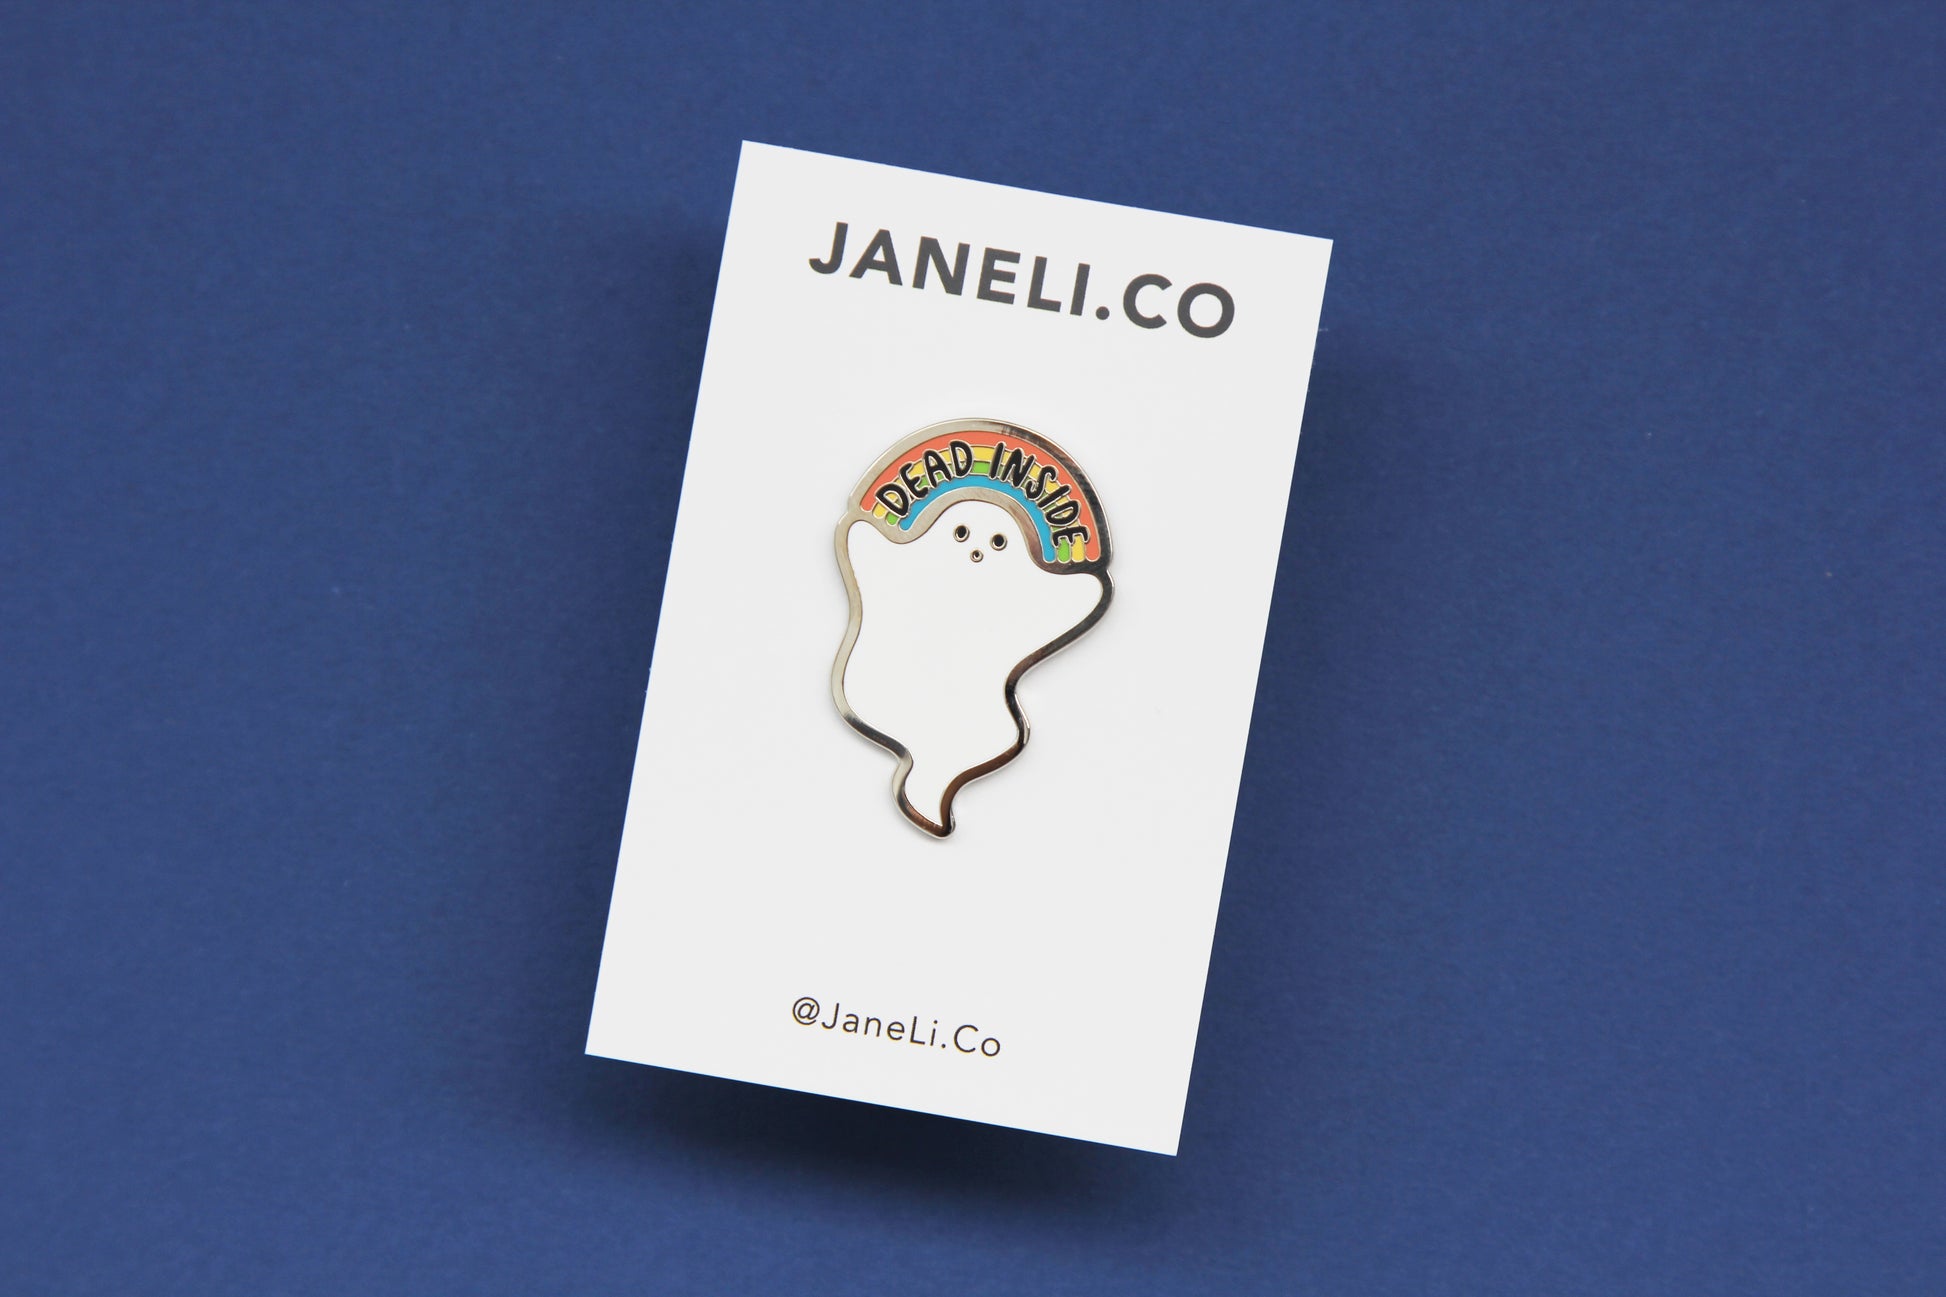 An enamel pin showing a little white ghost holding a rainbow that says "Dead Inside" on a white JaneLi.Co backing card over a navy background.